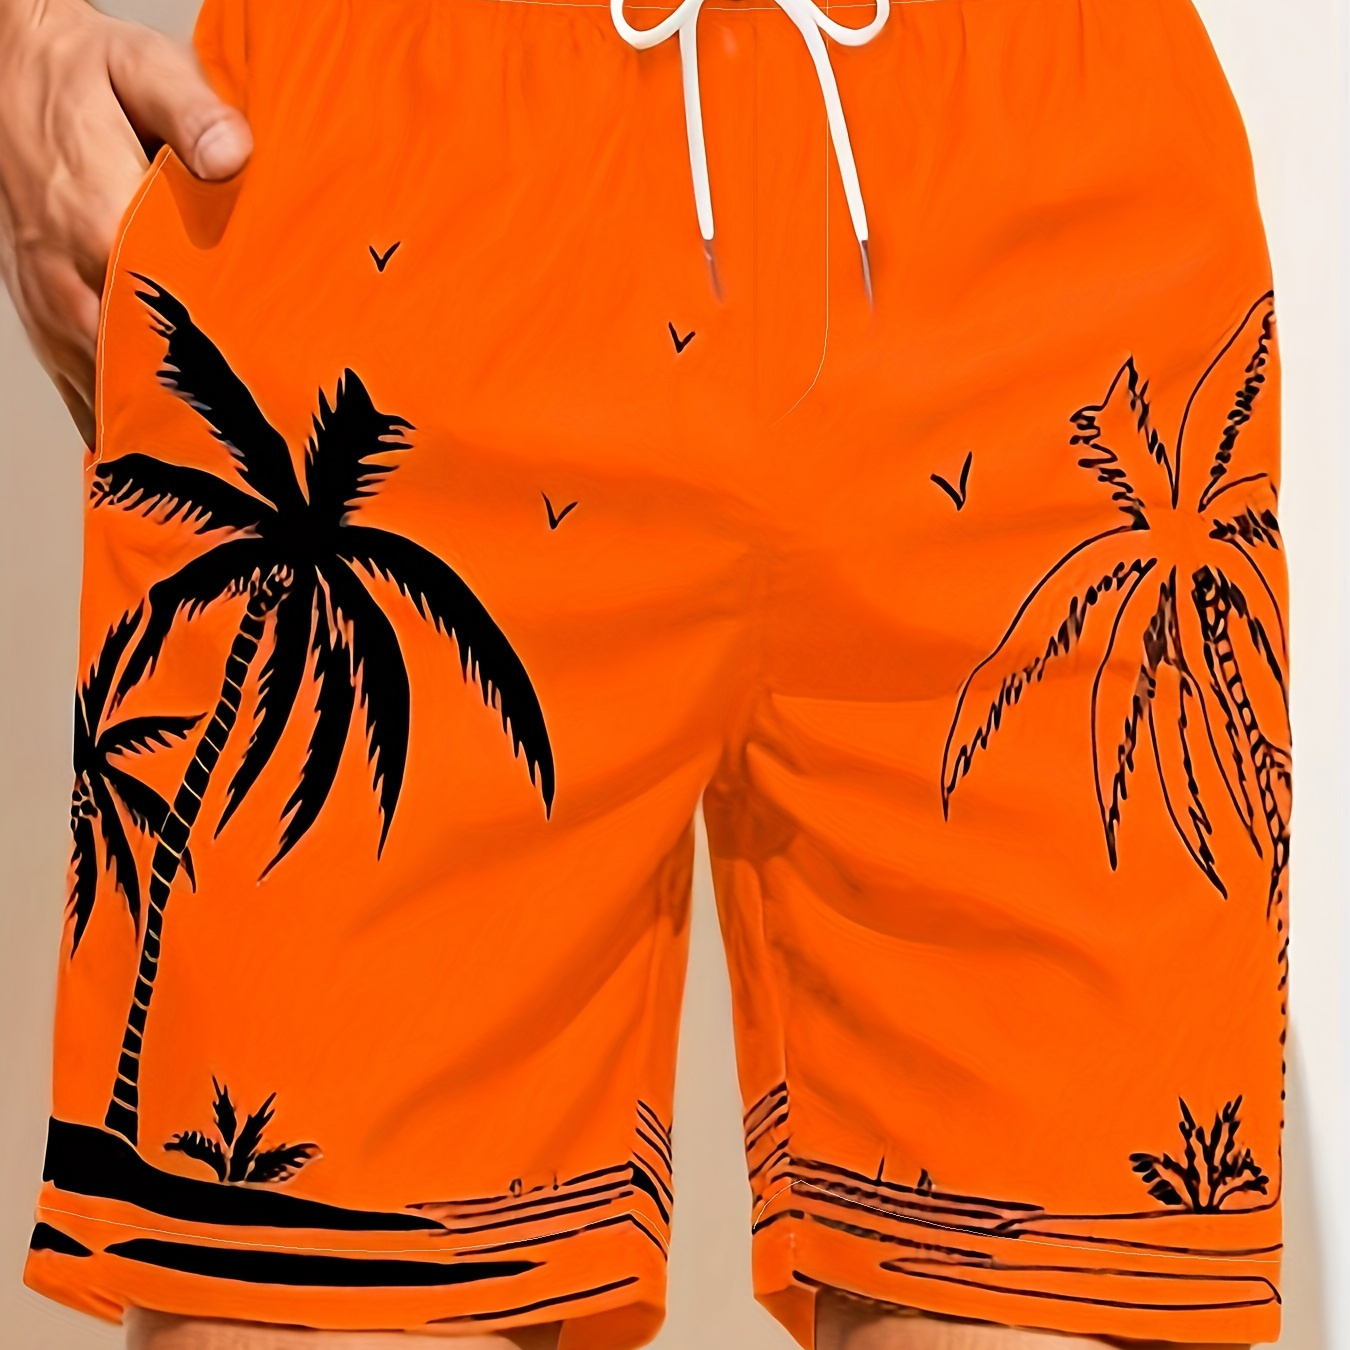 

Quick Drying Mesh Lining Comfortable Breathable Palm Tree Pattern Drawstring Swim Trunks With 2 Pockets, Men's Pants Swimwear For Summer Vacation Resort Beach Pool